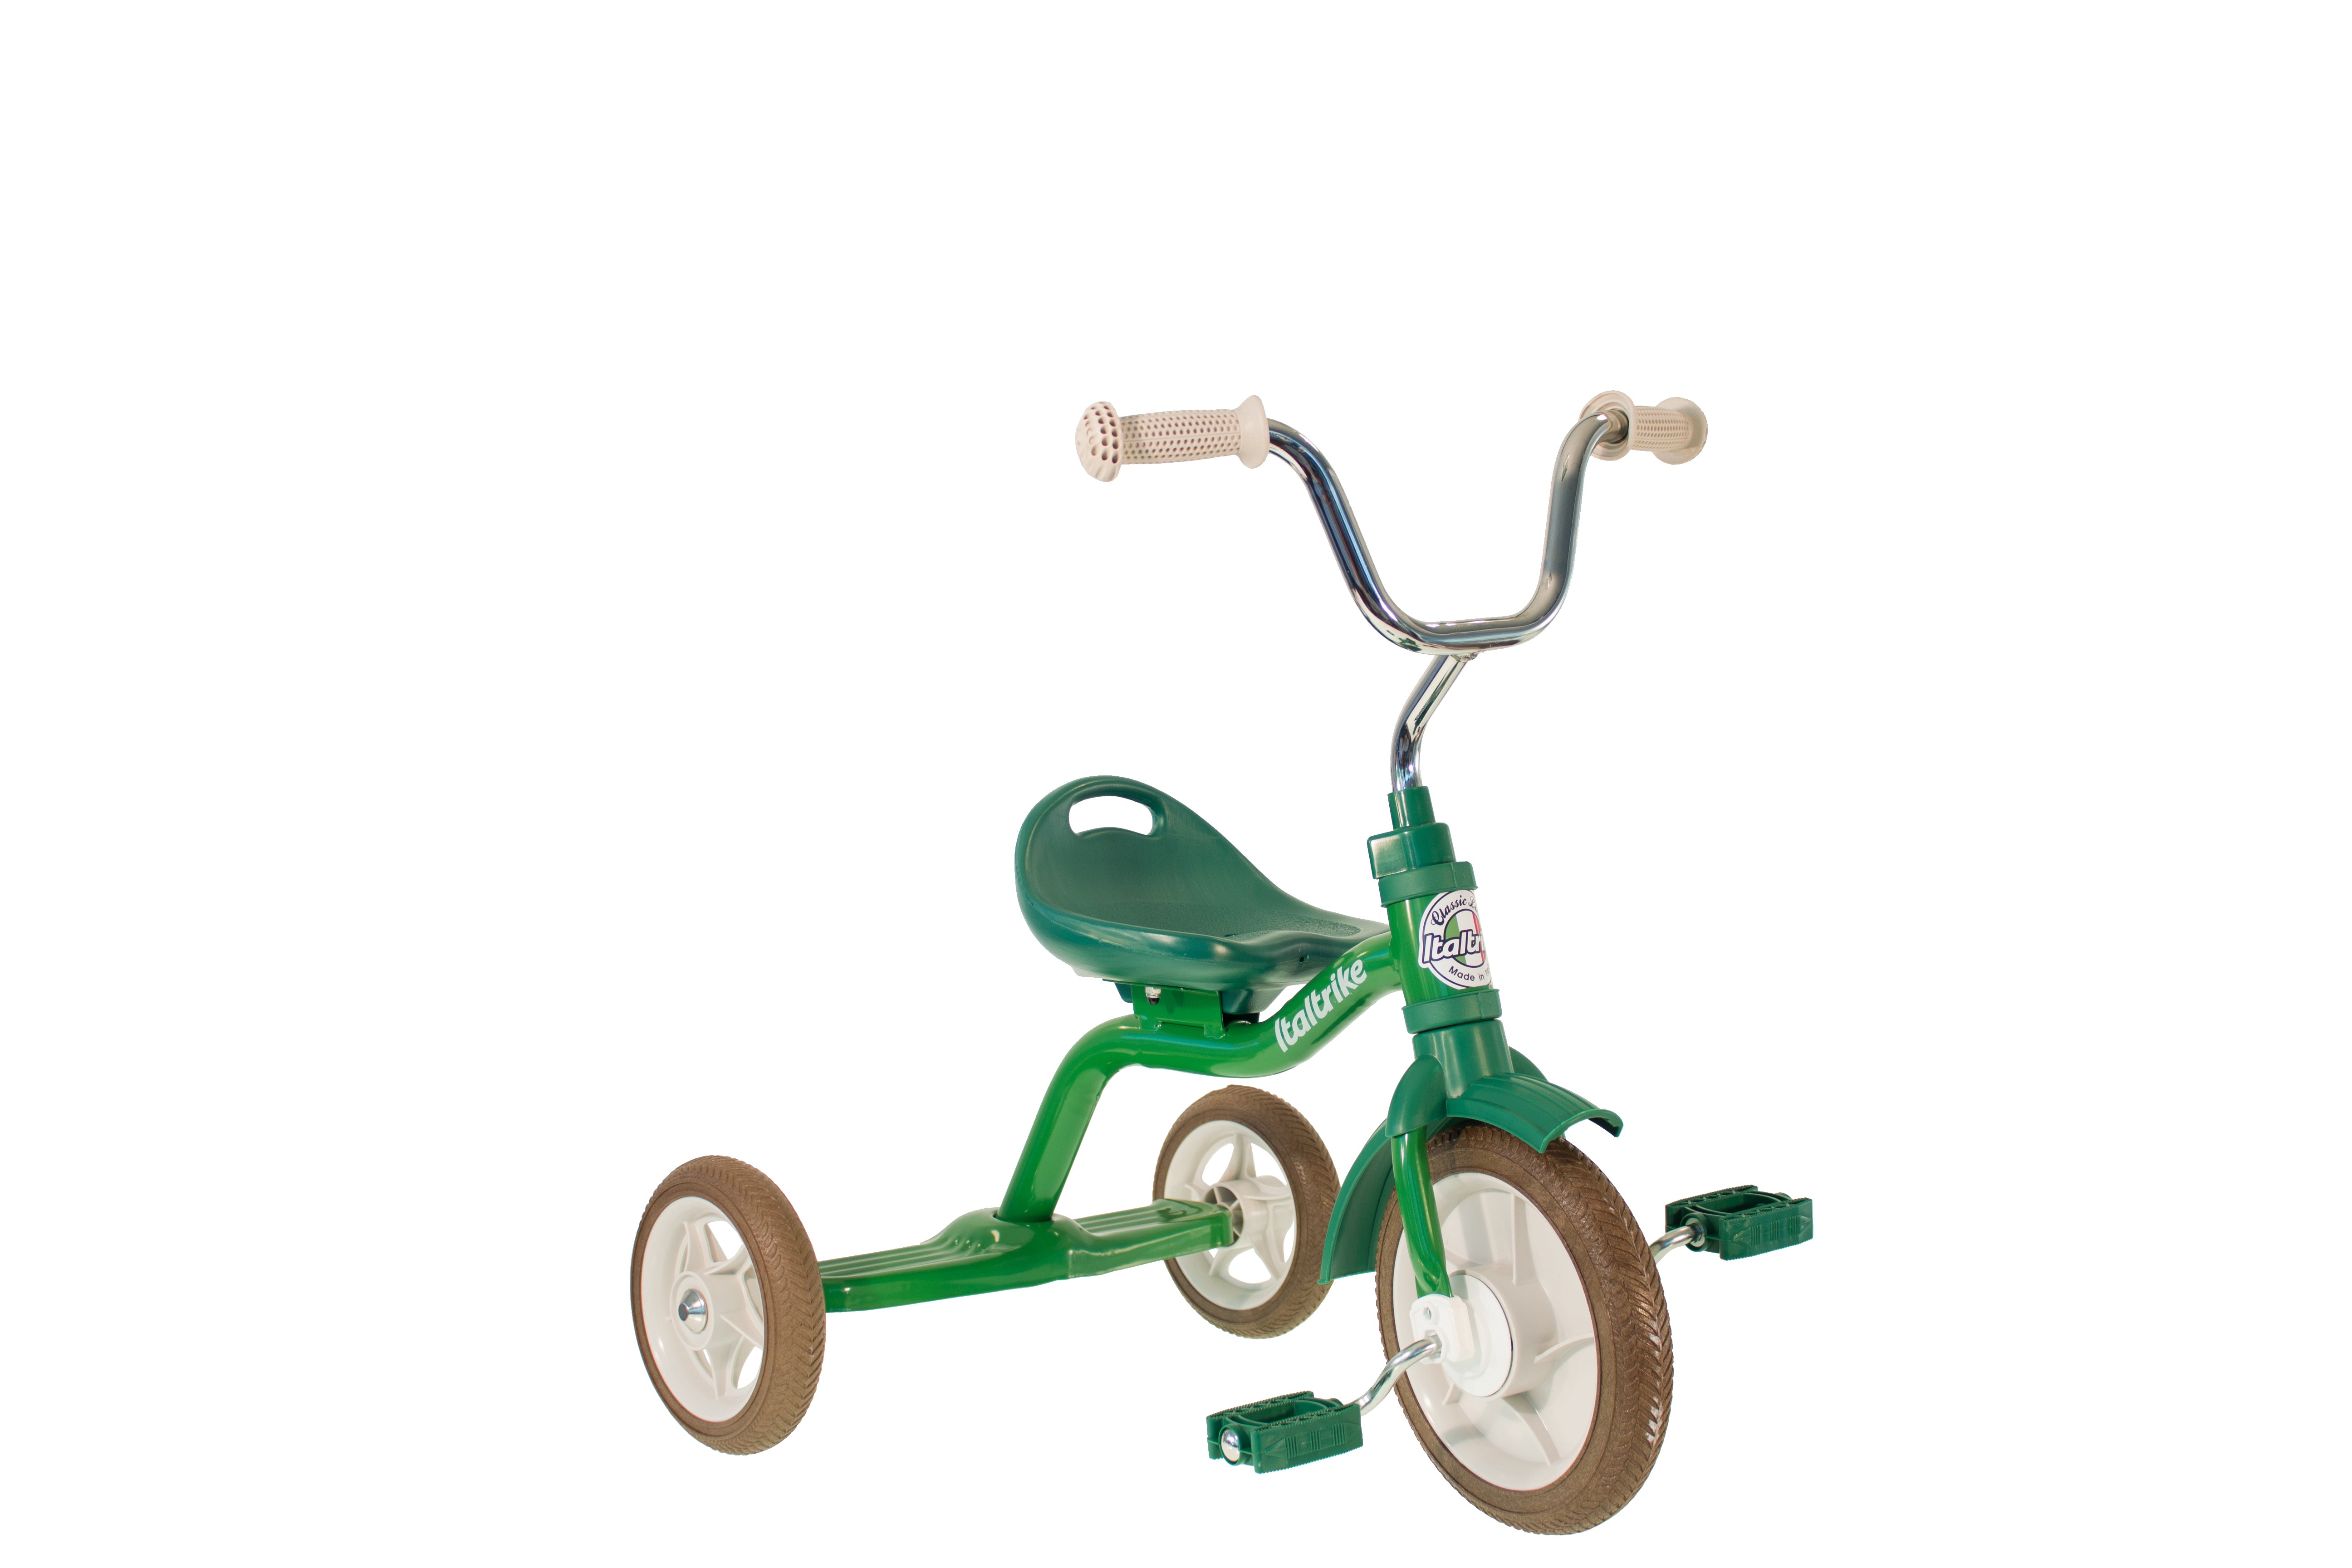 Classic10 Inches Supertouring Primavera Tricycle in Green by